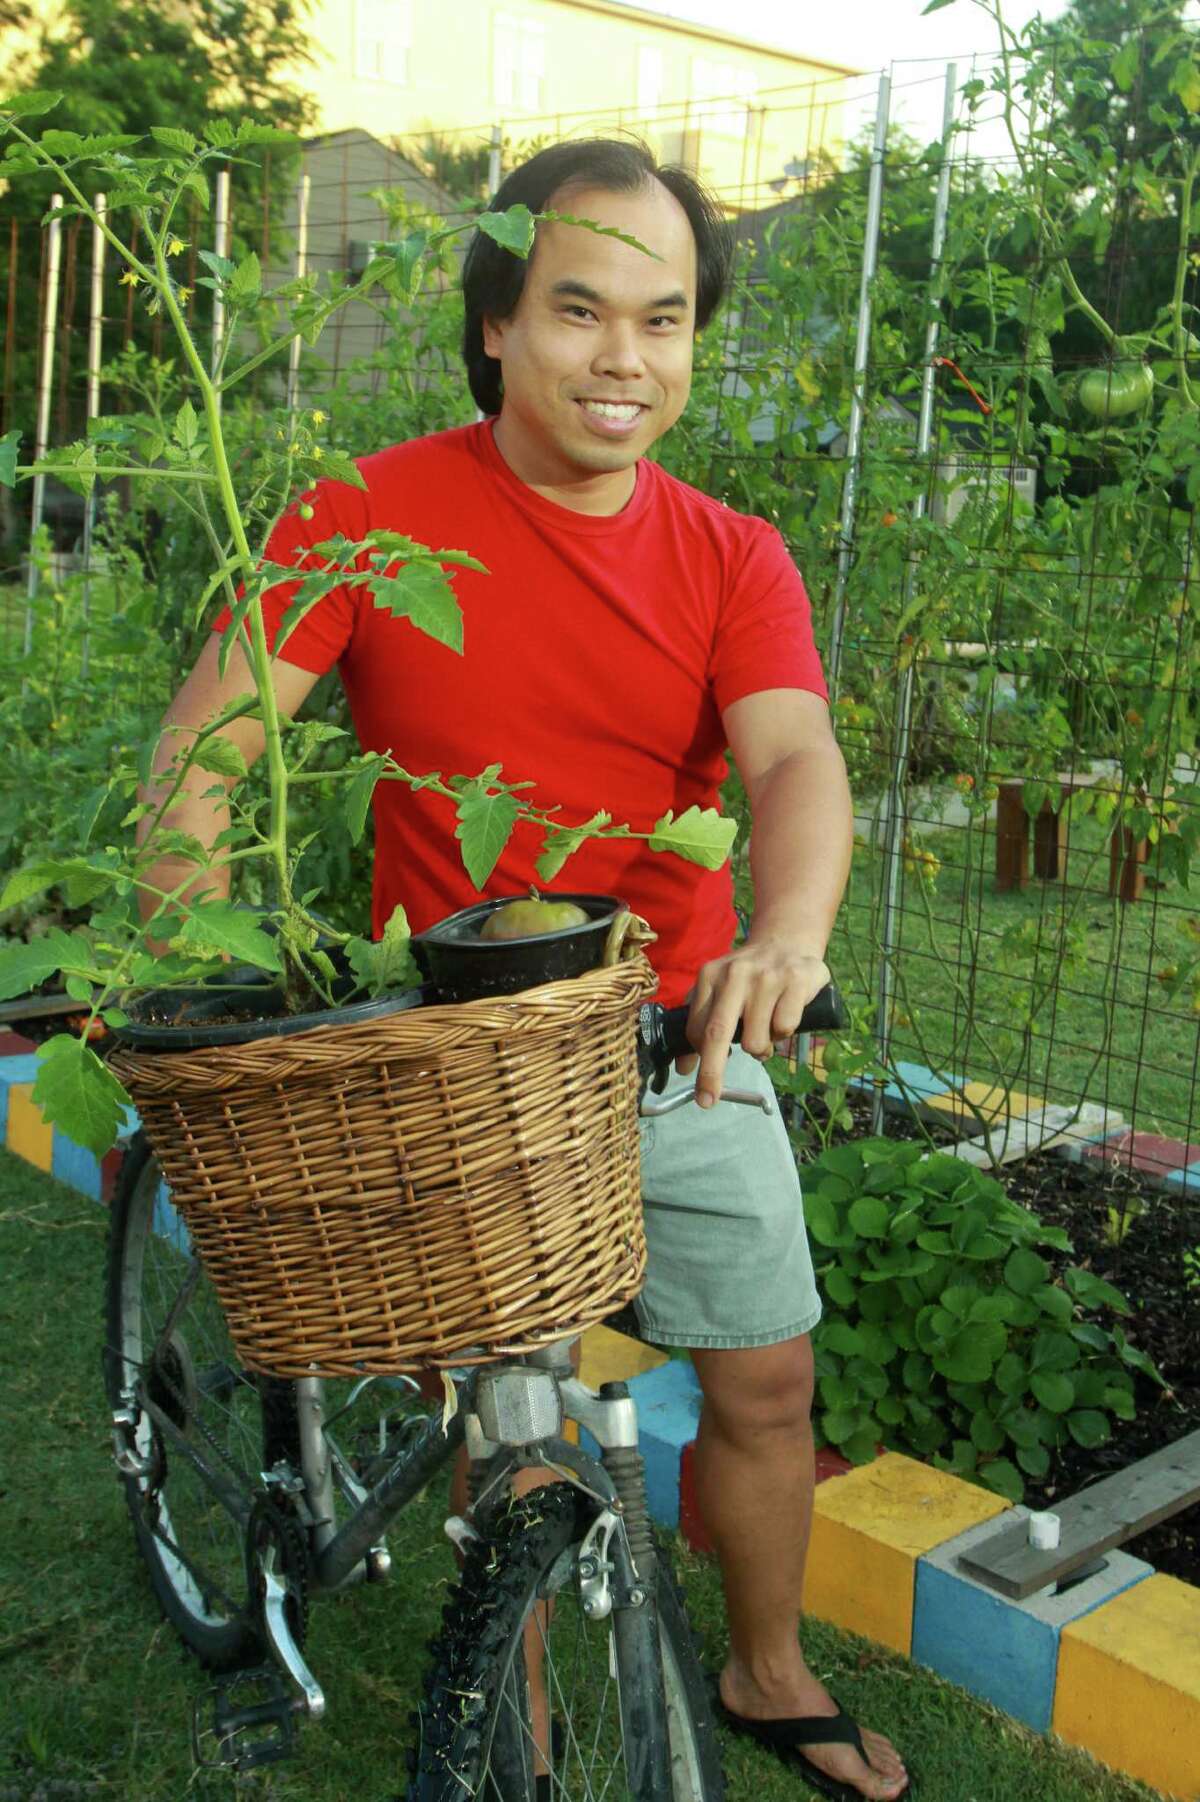 (For the Chronicle/Gary Fountain, May 17, 2012) Wing Tse at the Midtown Community Garden at the corner of Drew and Baldwin with a Sun Gold cherry tomato plant in the basket of his bicycle.